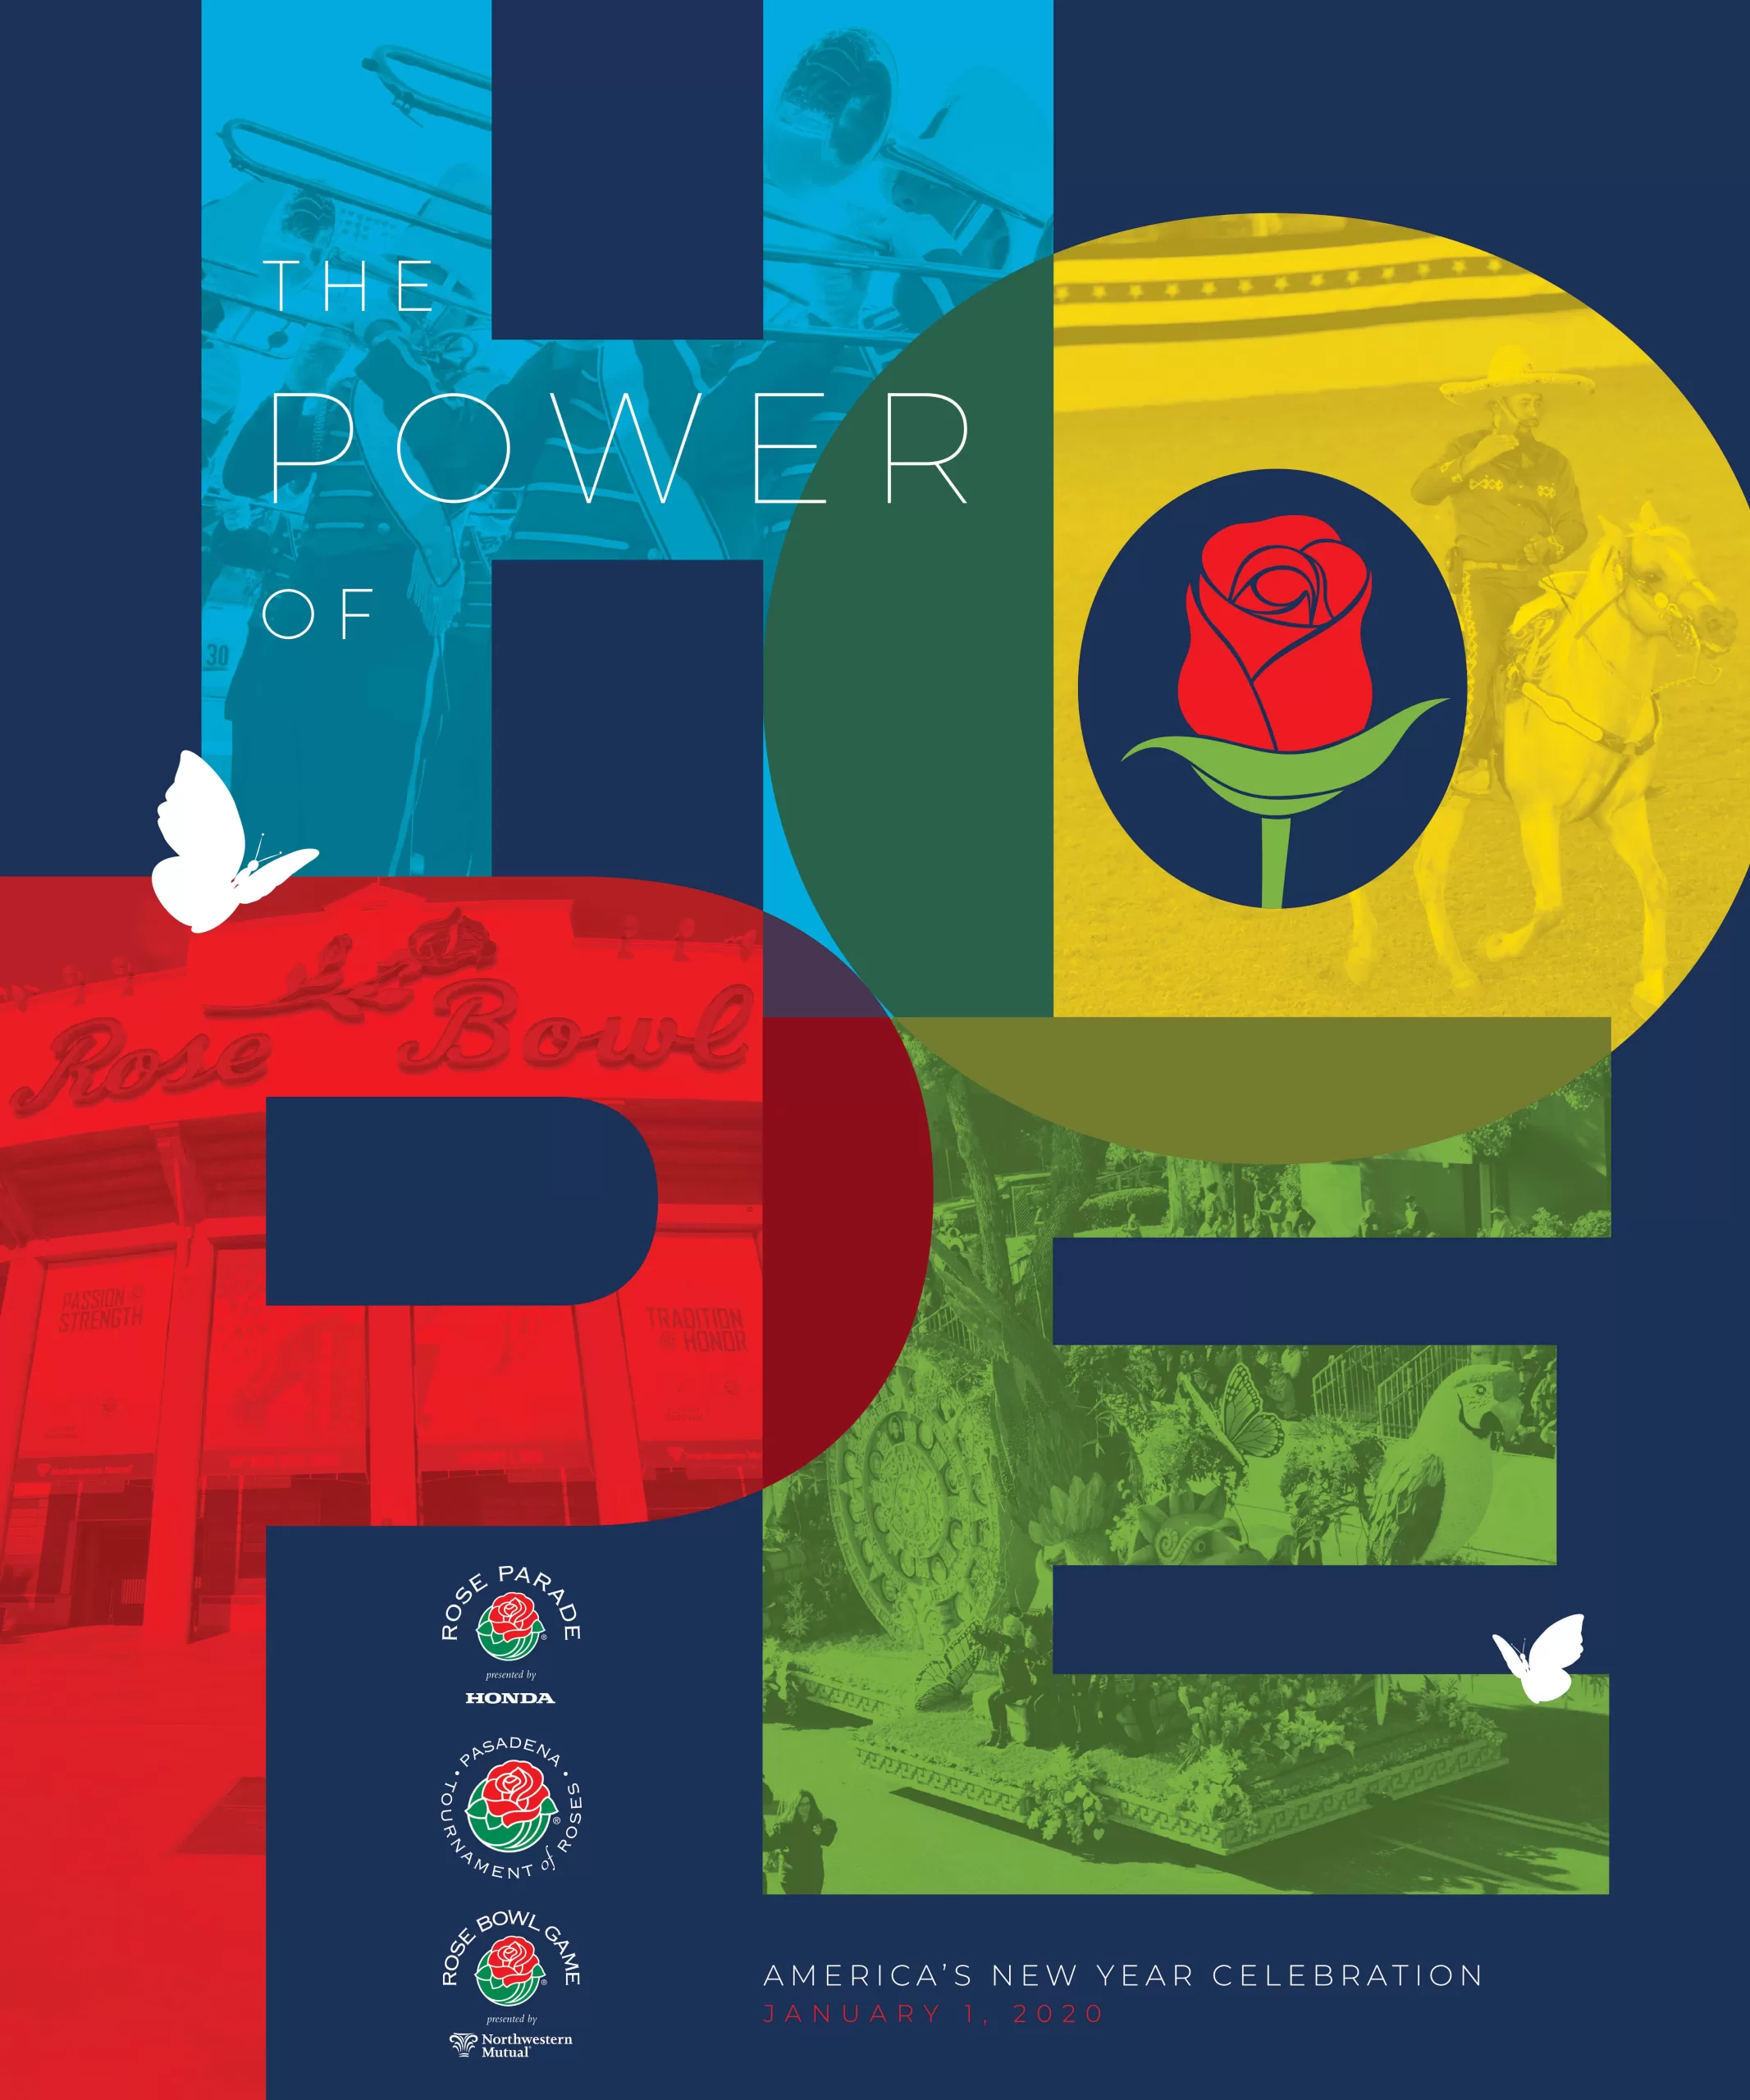 Colorful Rose Bowl 2020 poster with event images and text "The Power of Hope."